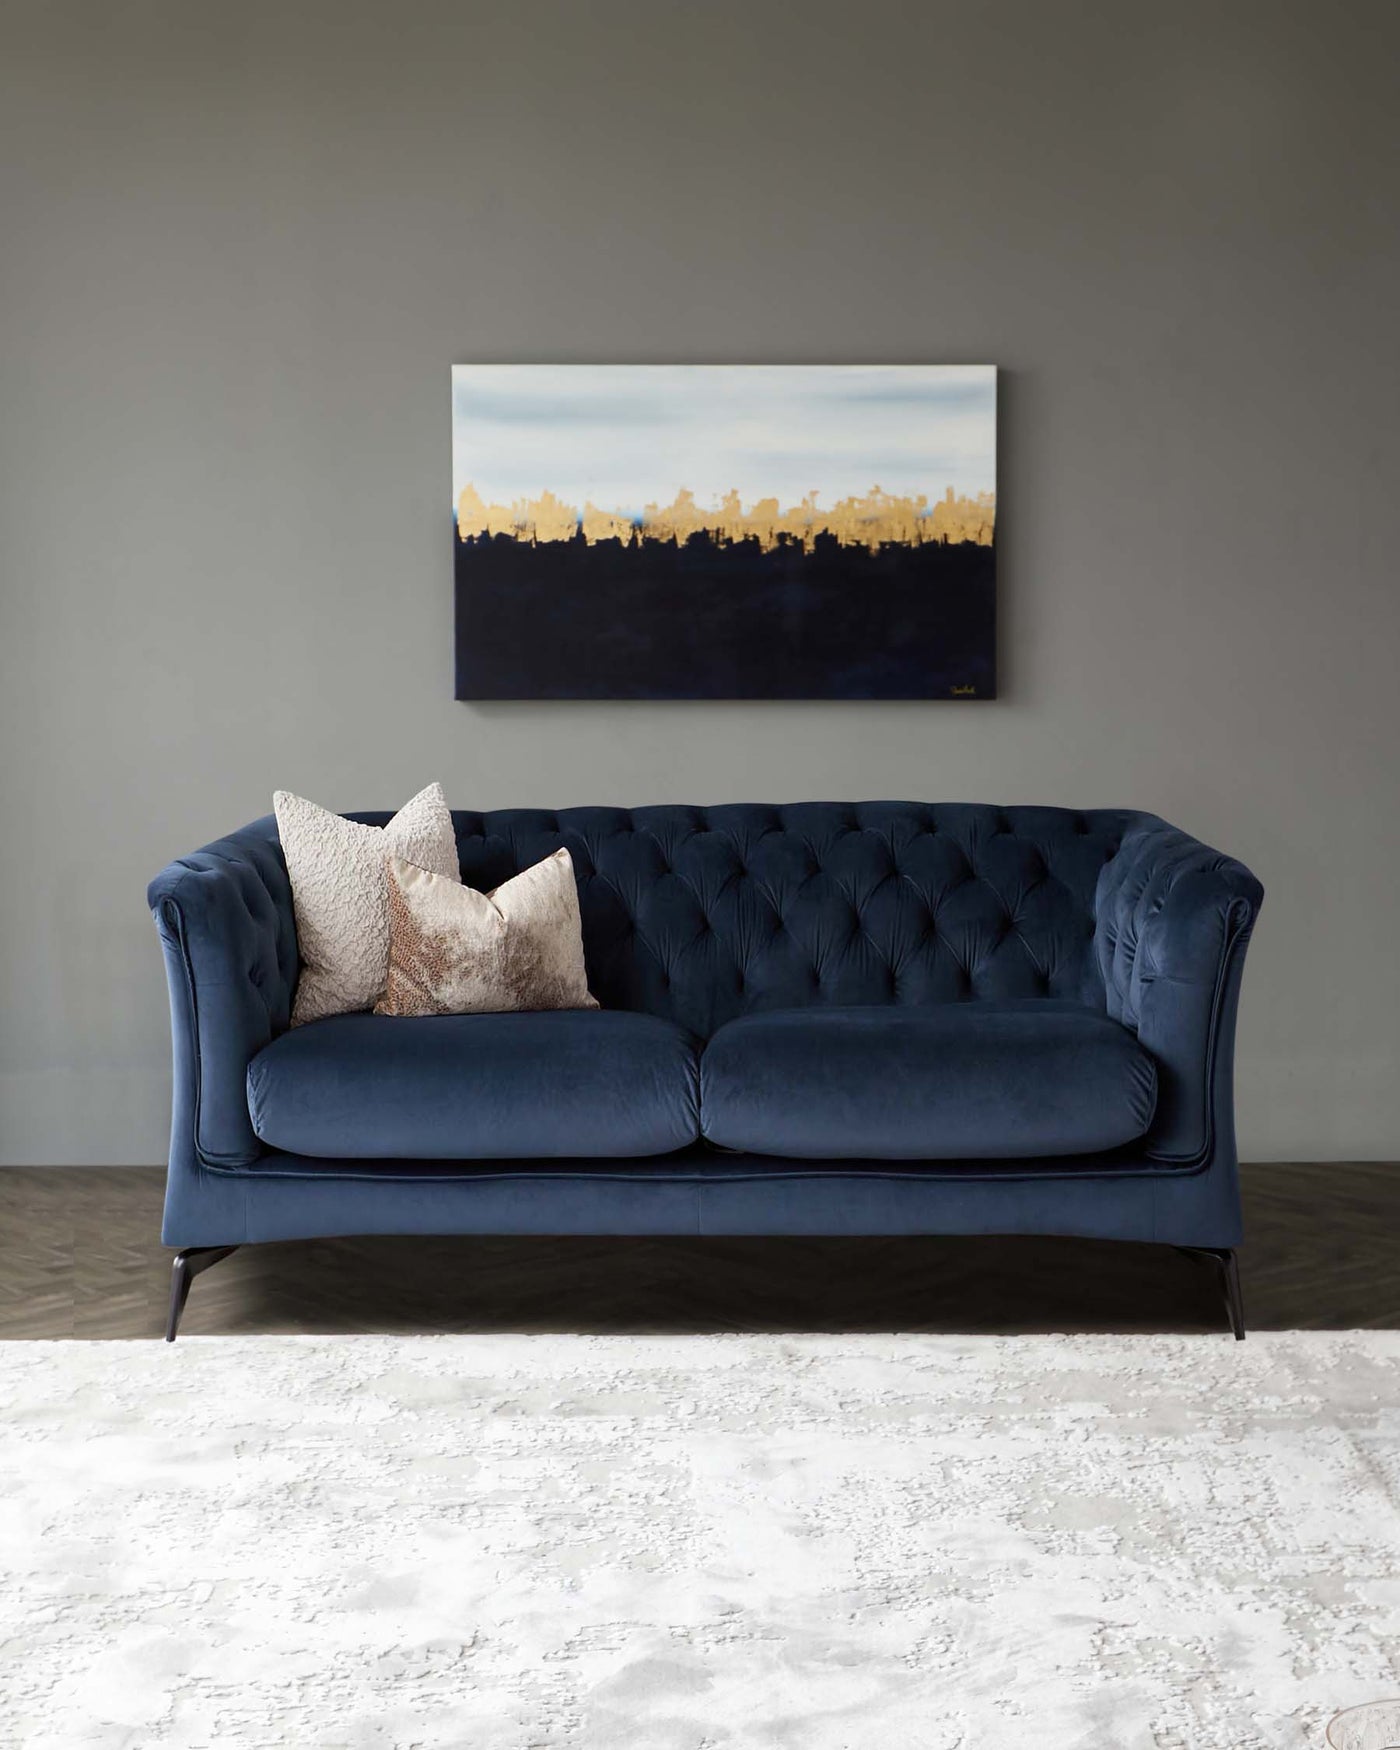 Elegant tufted navy blue velvet sofa with three plush cushions and scrolled arms, set atop tapered dark wooden legs on a textured off-white area rug.